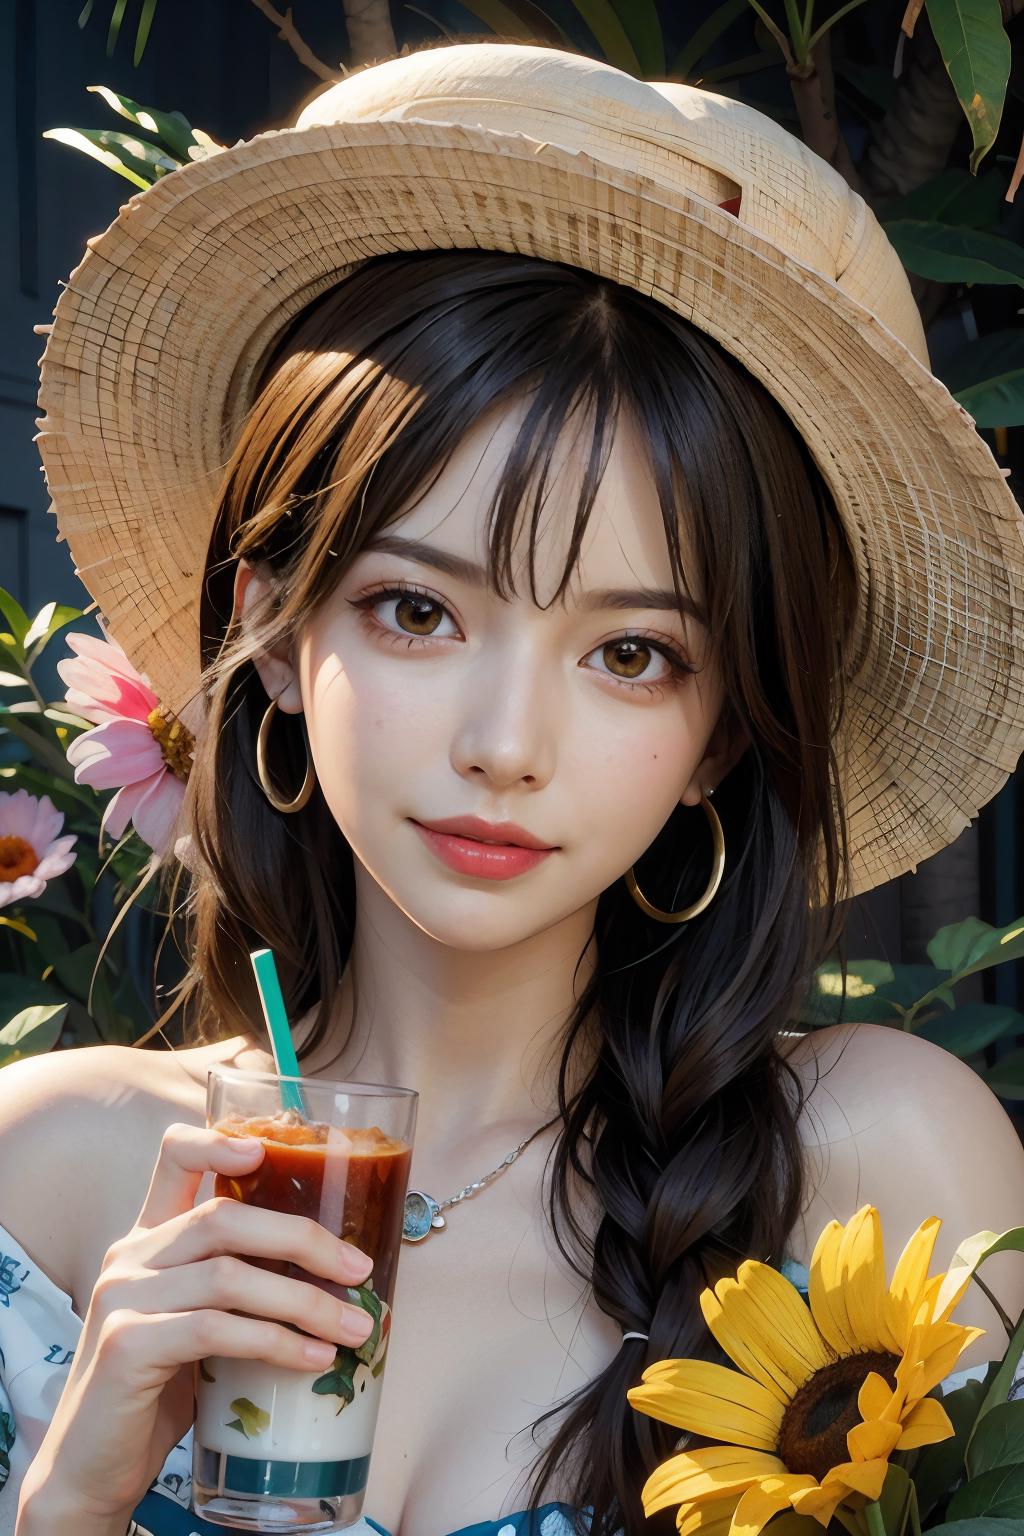 A woman in a straw hat holding a glass of red liquid, possibly a cocktail.